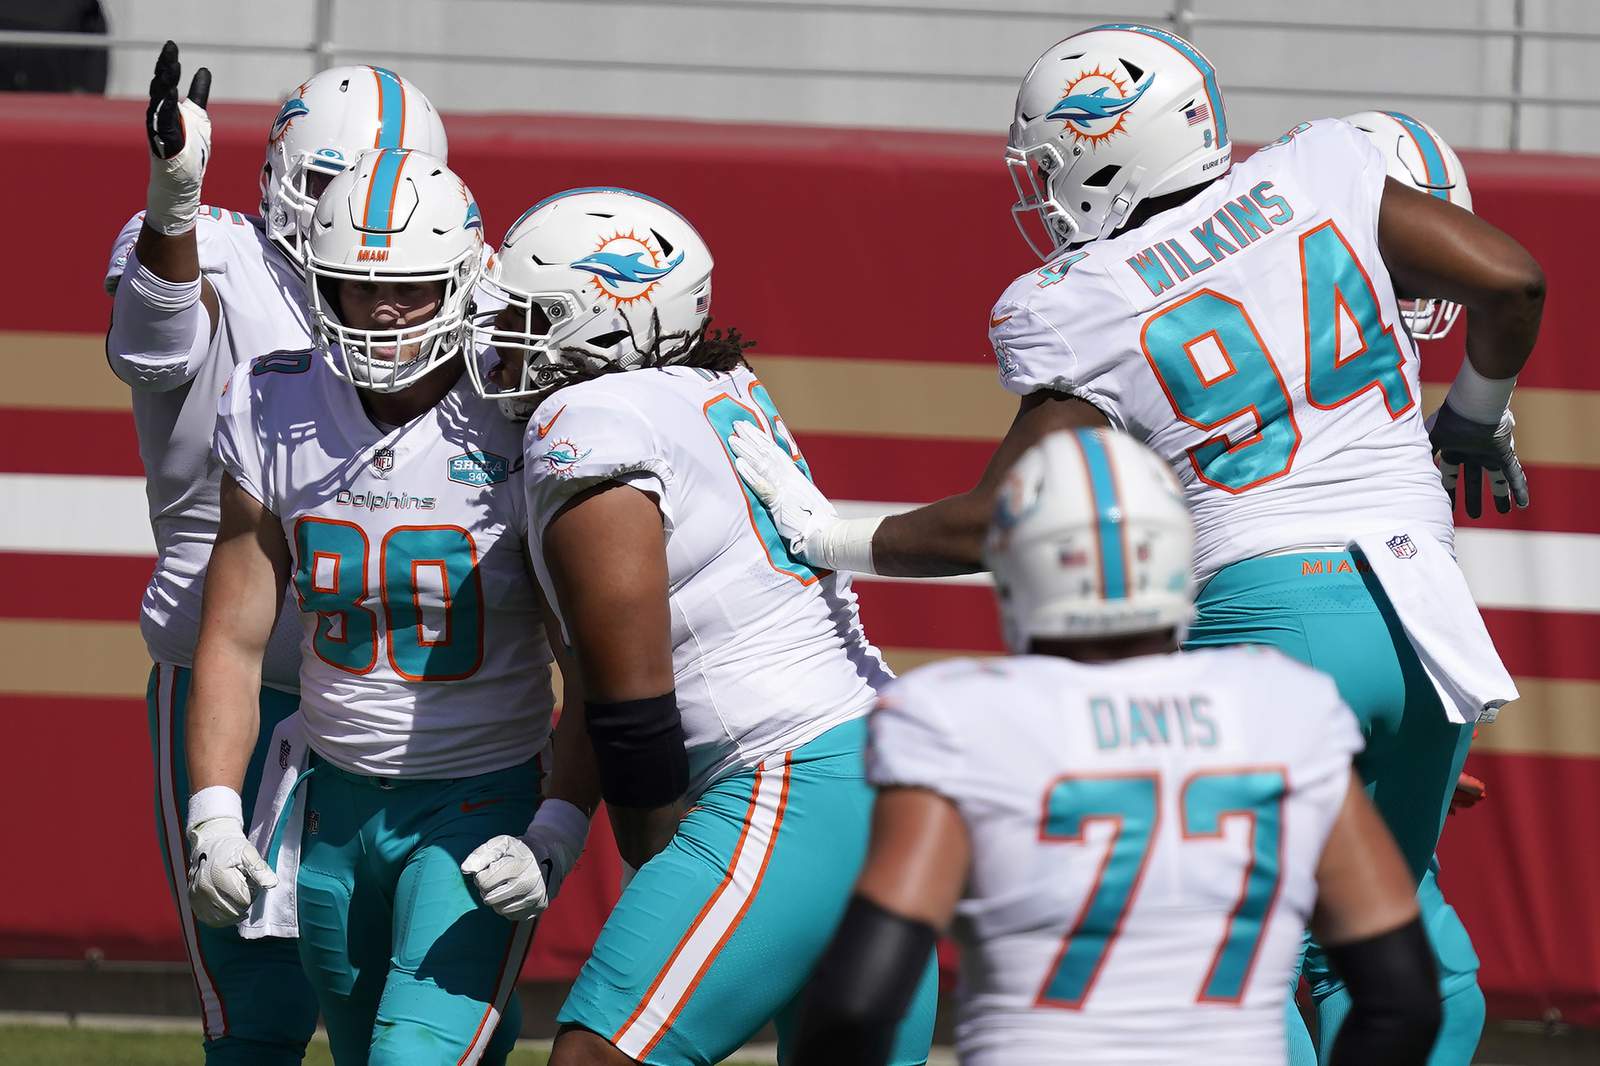 Fitzpatrick’s 3 TD passes lead Dolphins past 49ers 43-17